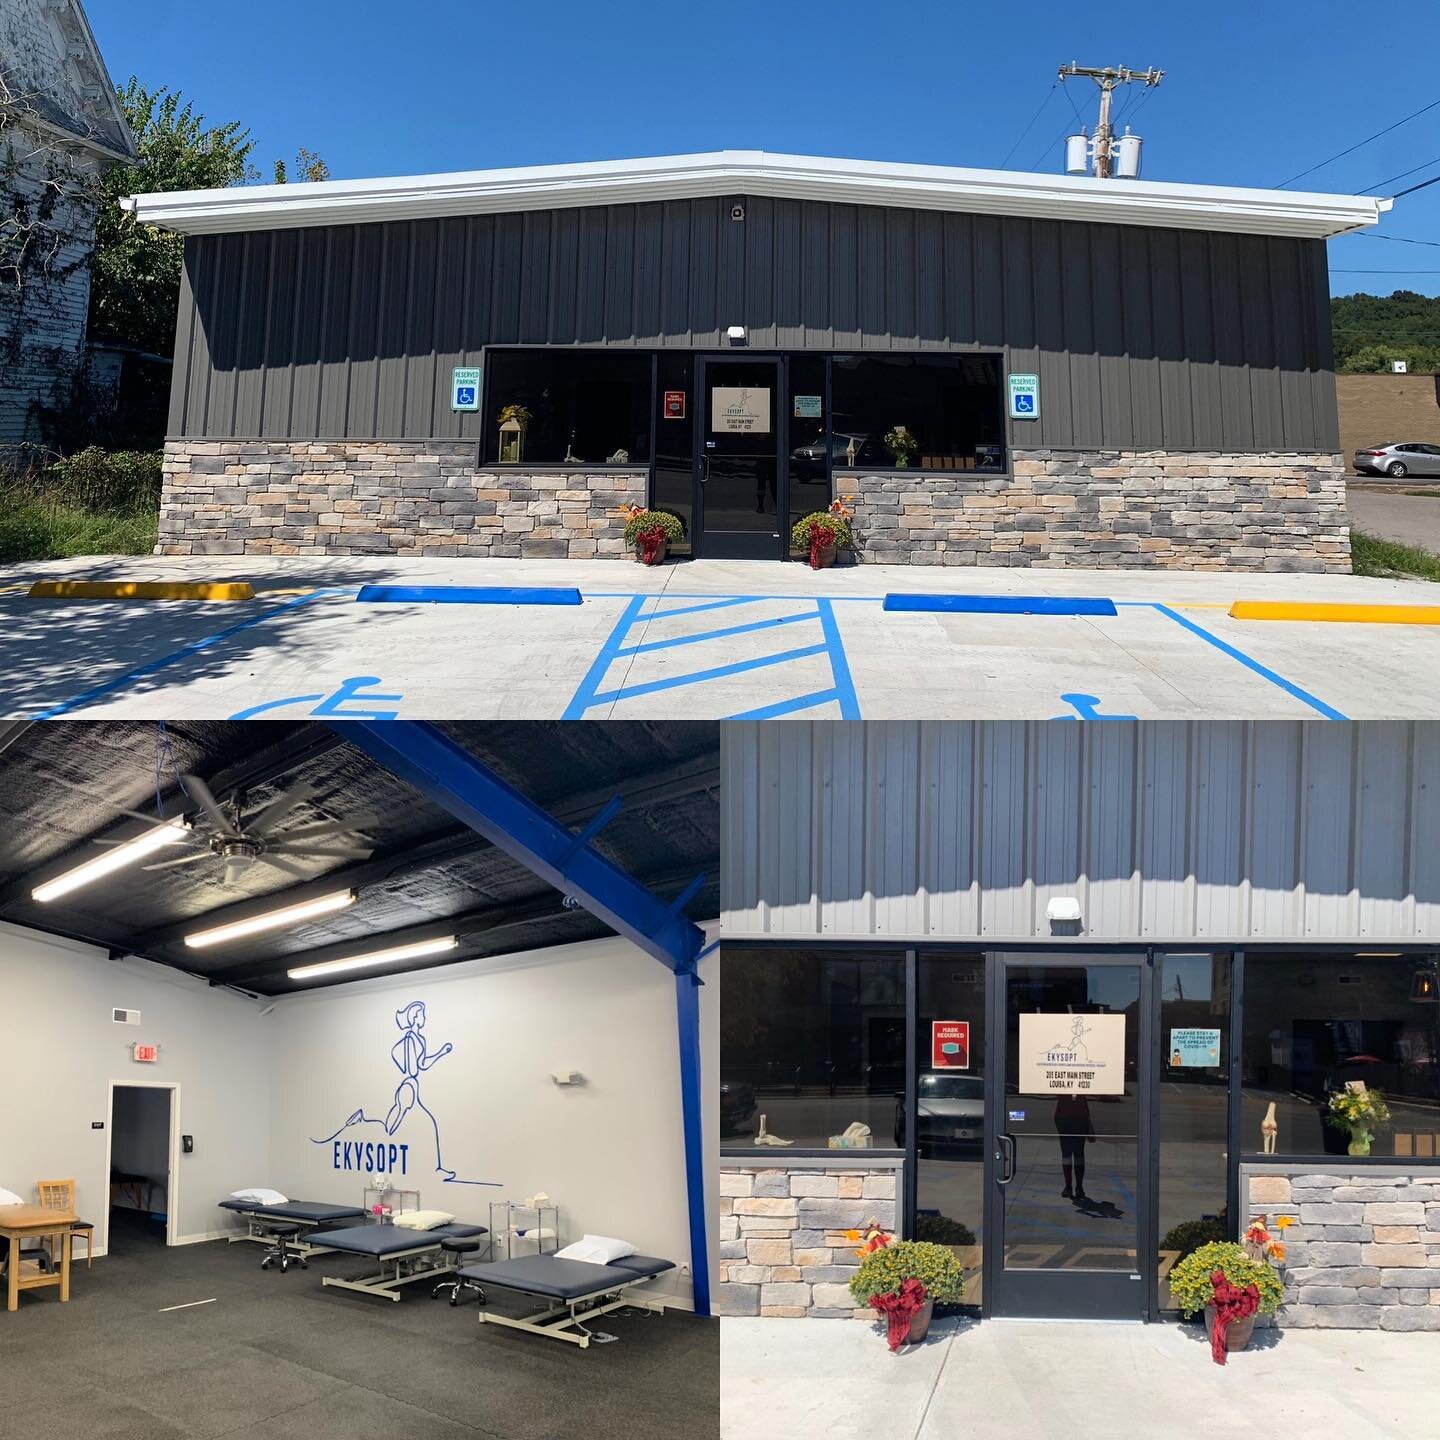 We are officially open!!! Now taking new patients at our clinic, located in downtown Louisa! We are so excited to start providing care to our friends and neighbors of the area!